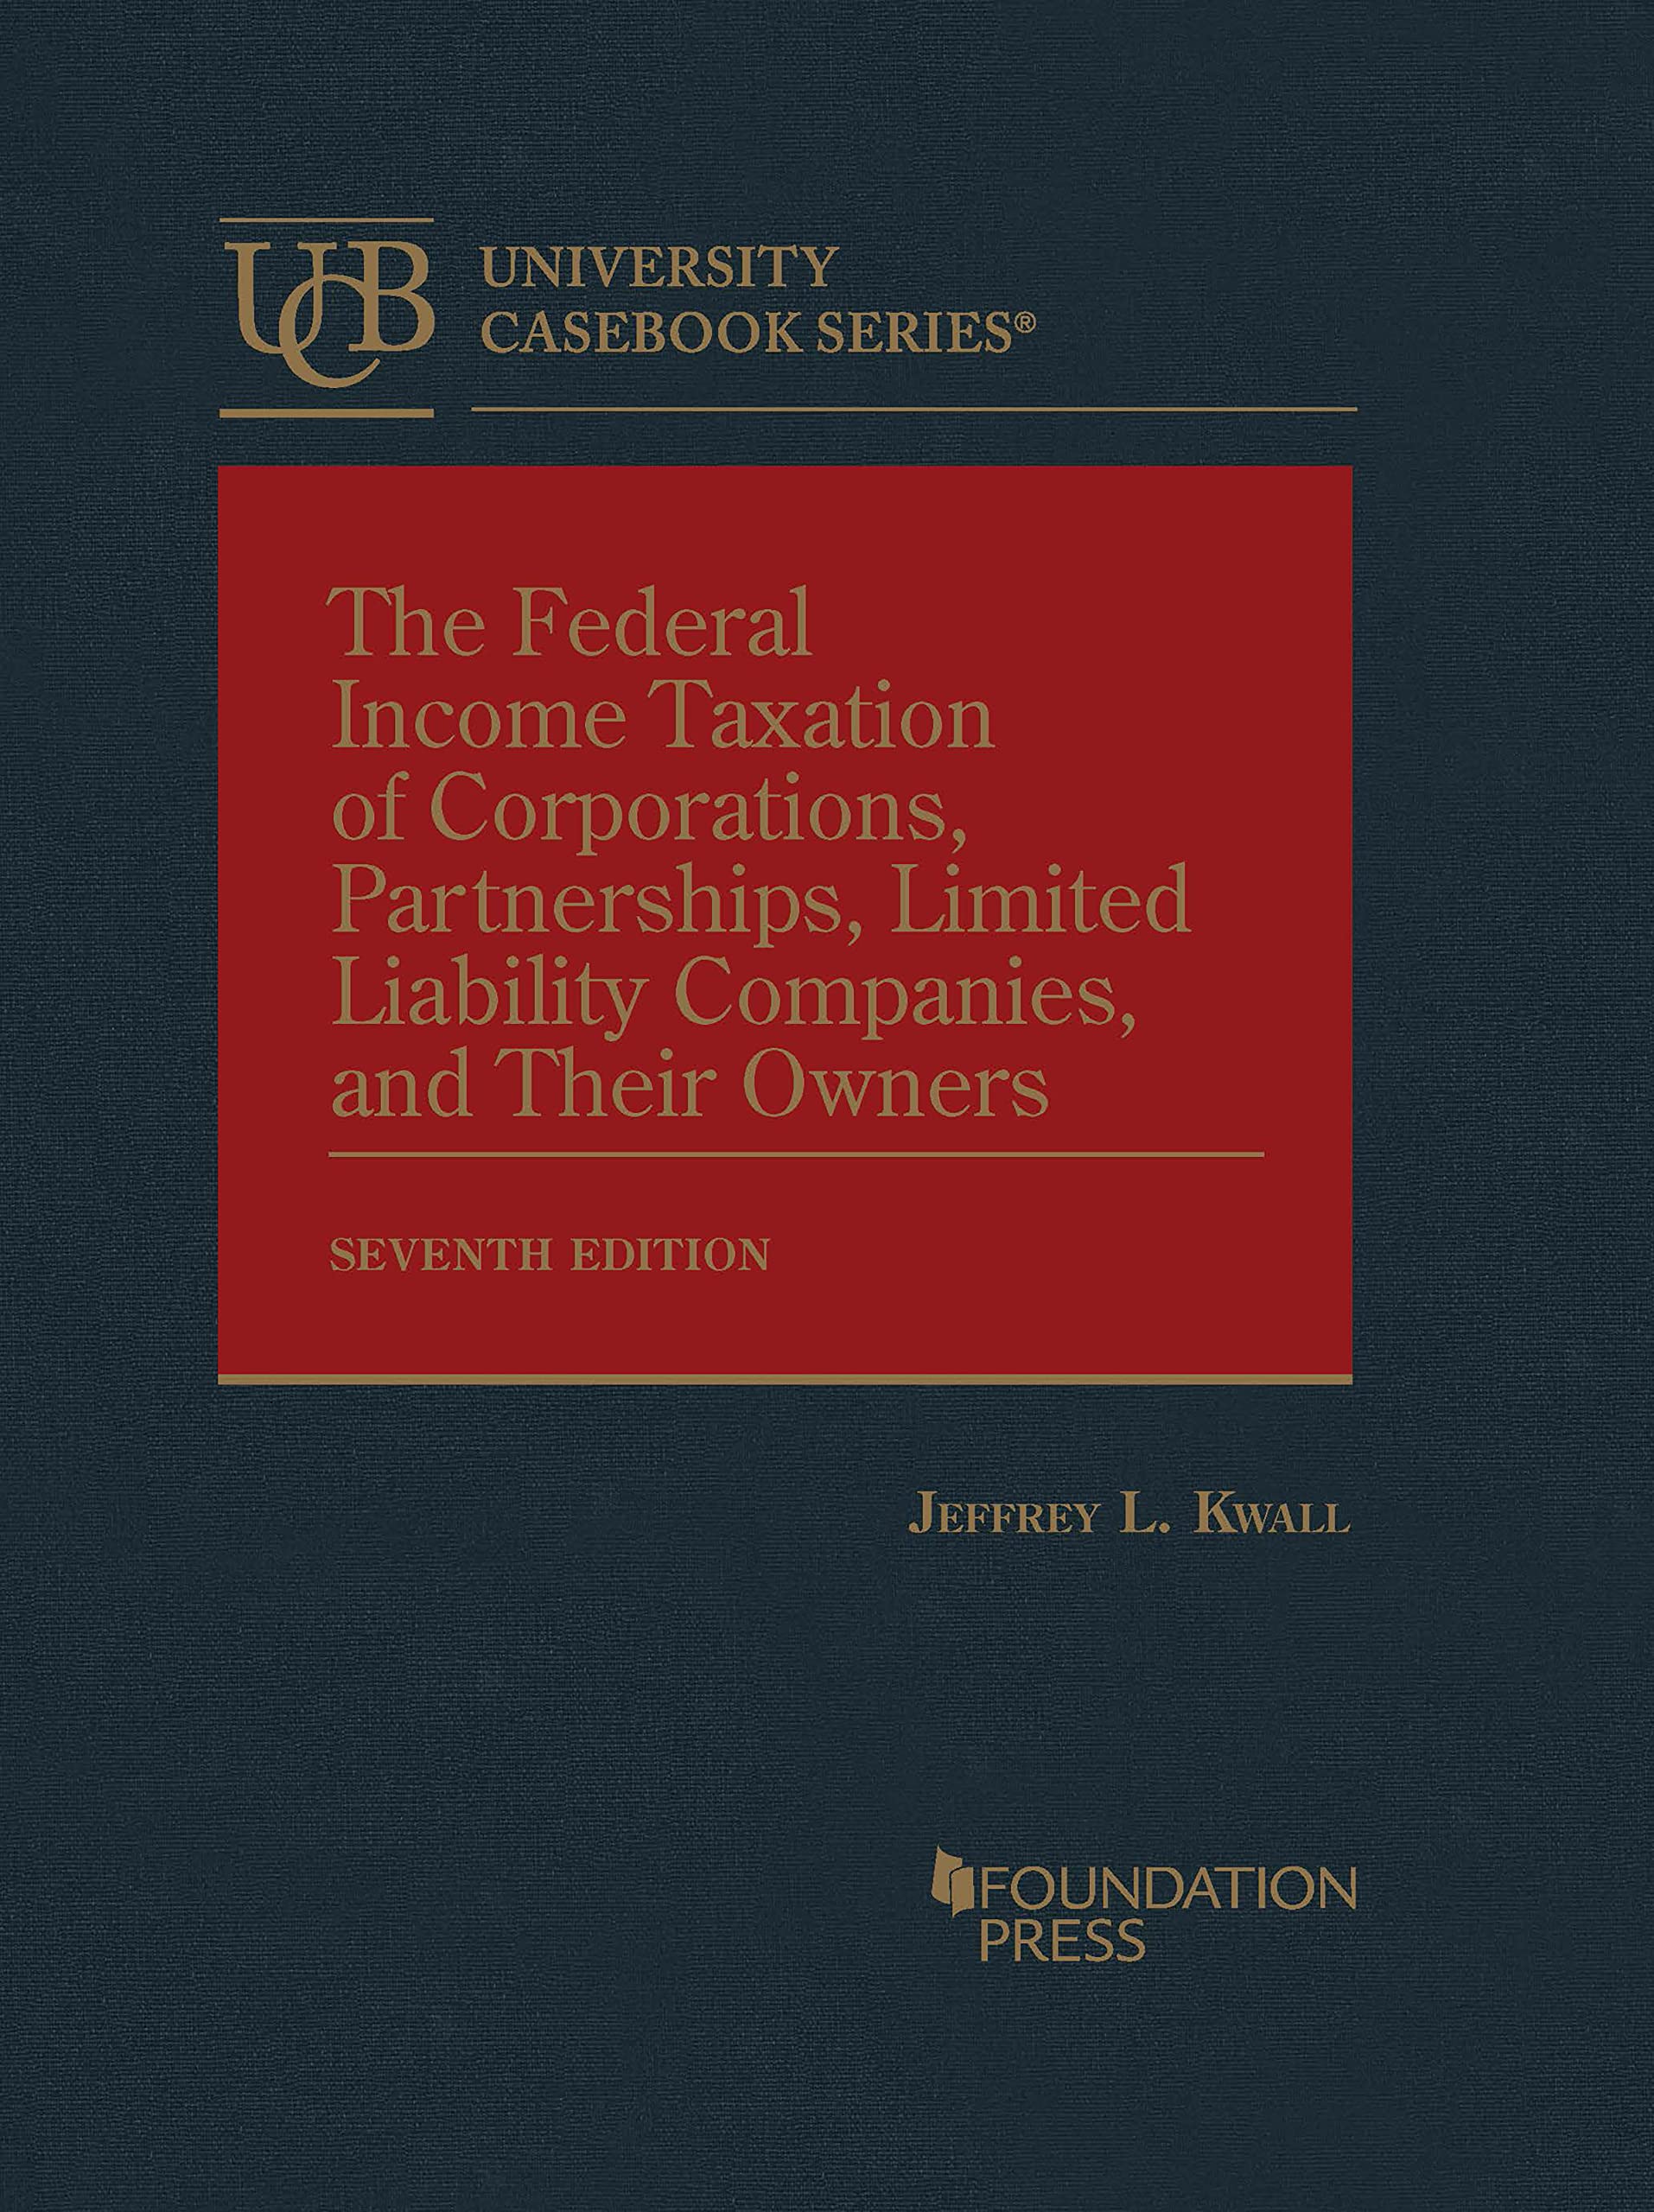 The Federal Income Taxation of Corporations, Partnerships, Limited Liability Companies, and Their Owners 7th Edition by Jeffrey L. Kwall 